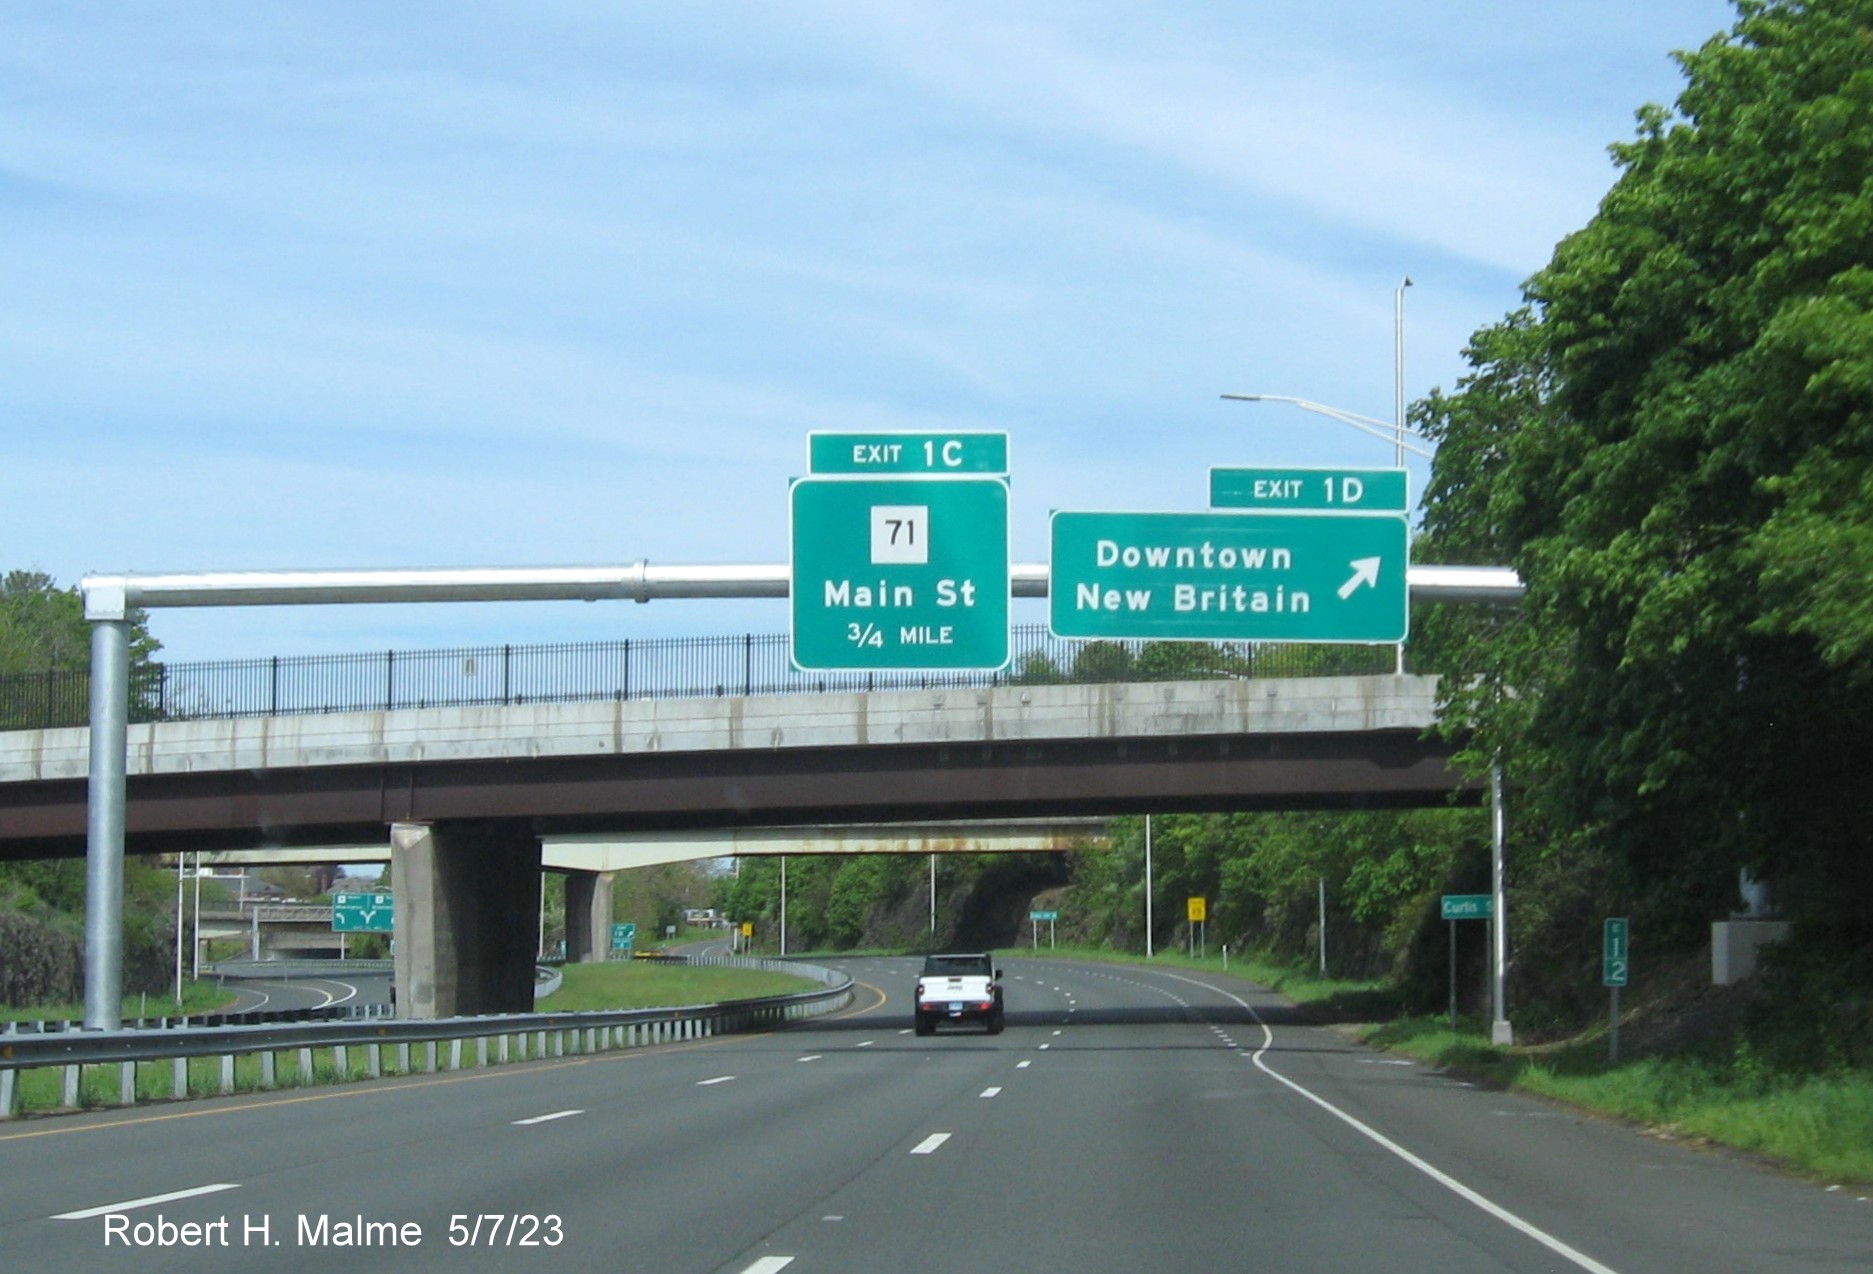 Image of 3/4 Mile advance for CT 71 exit and Downtown New Britain overhead exit signs with new milepost based exit numbers on CT 72 East, May 2023